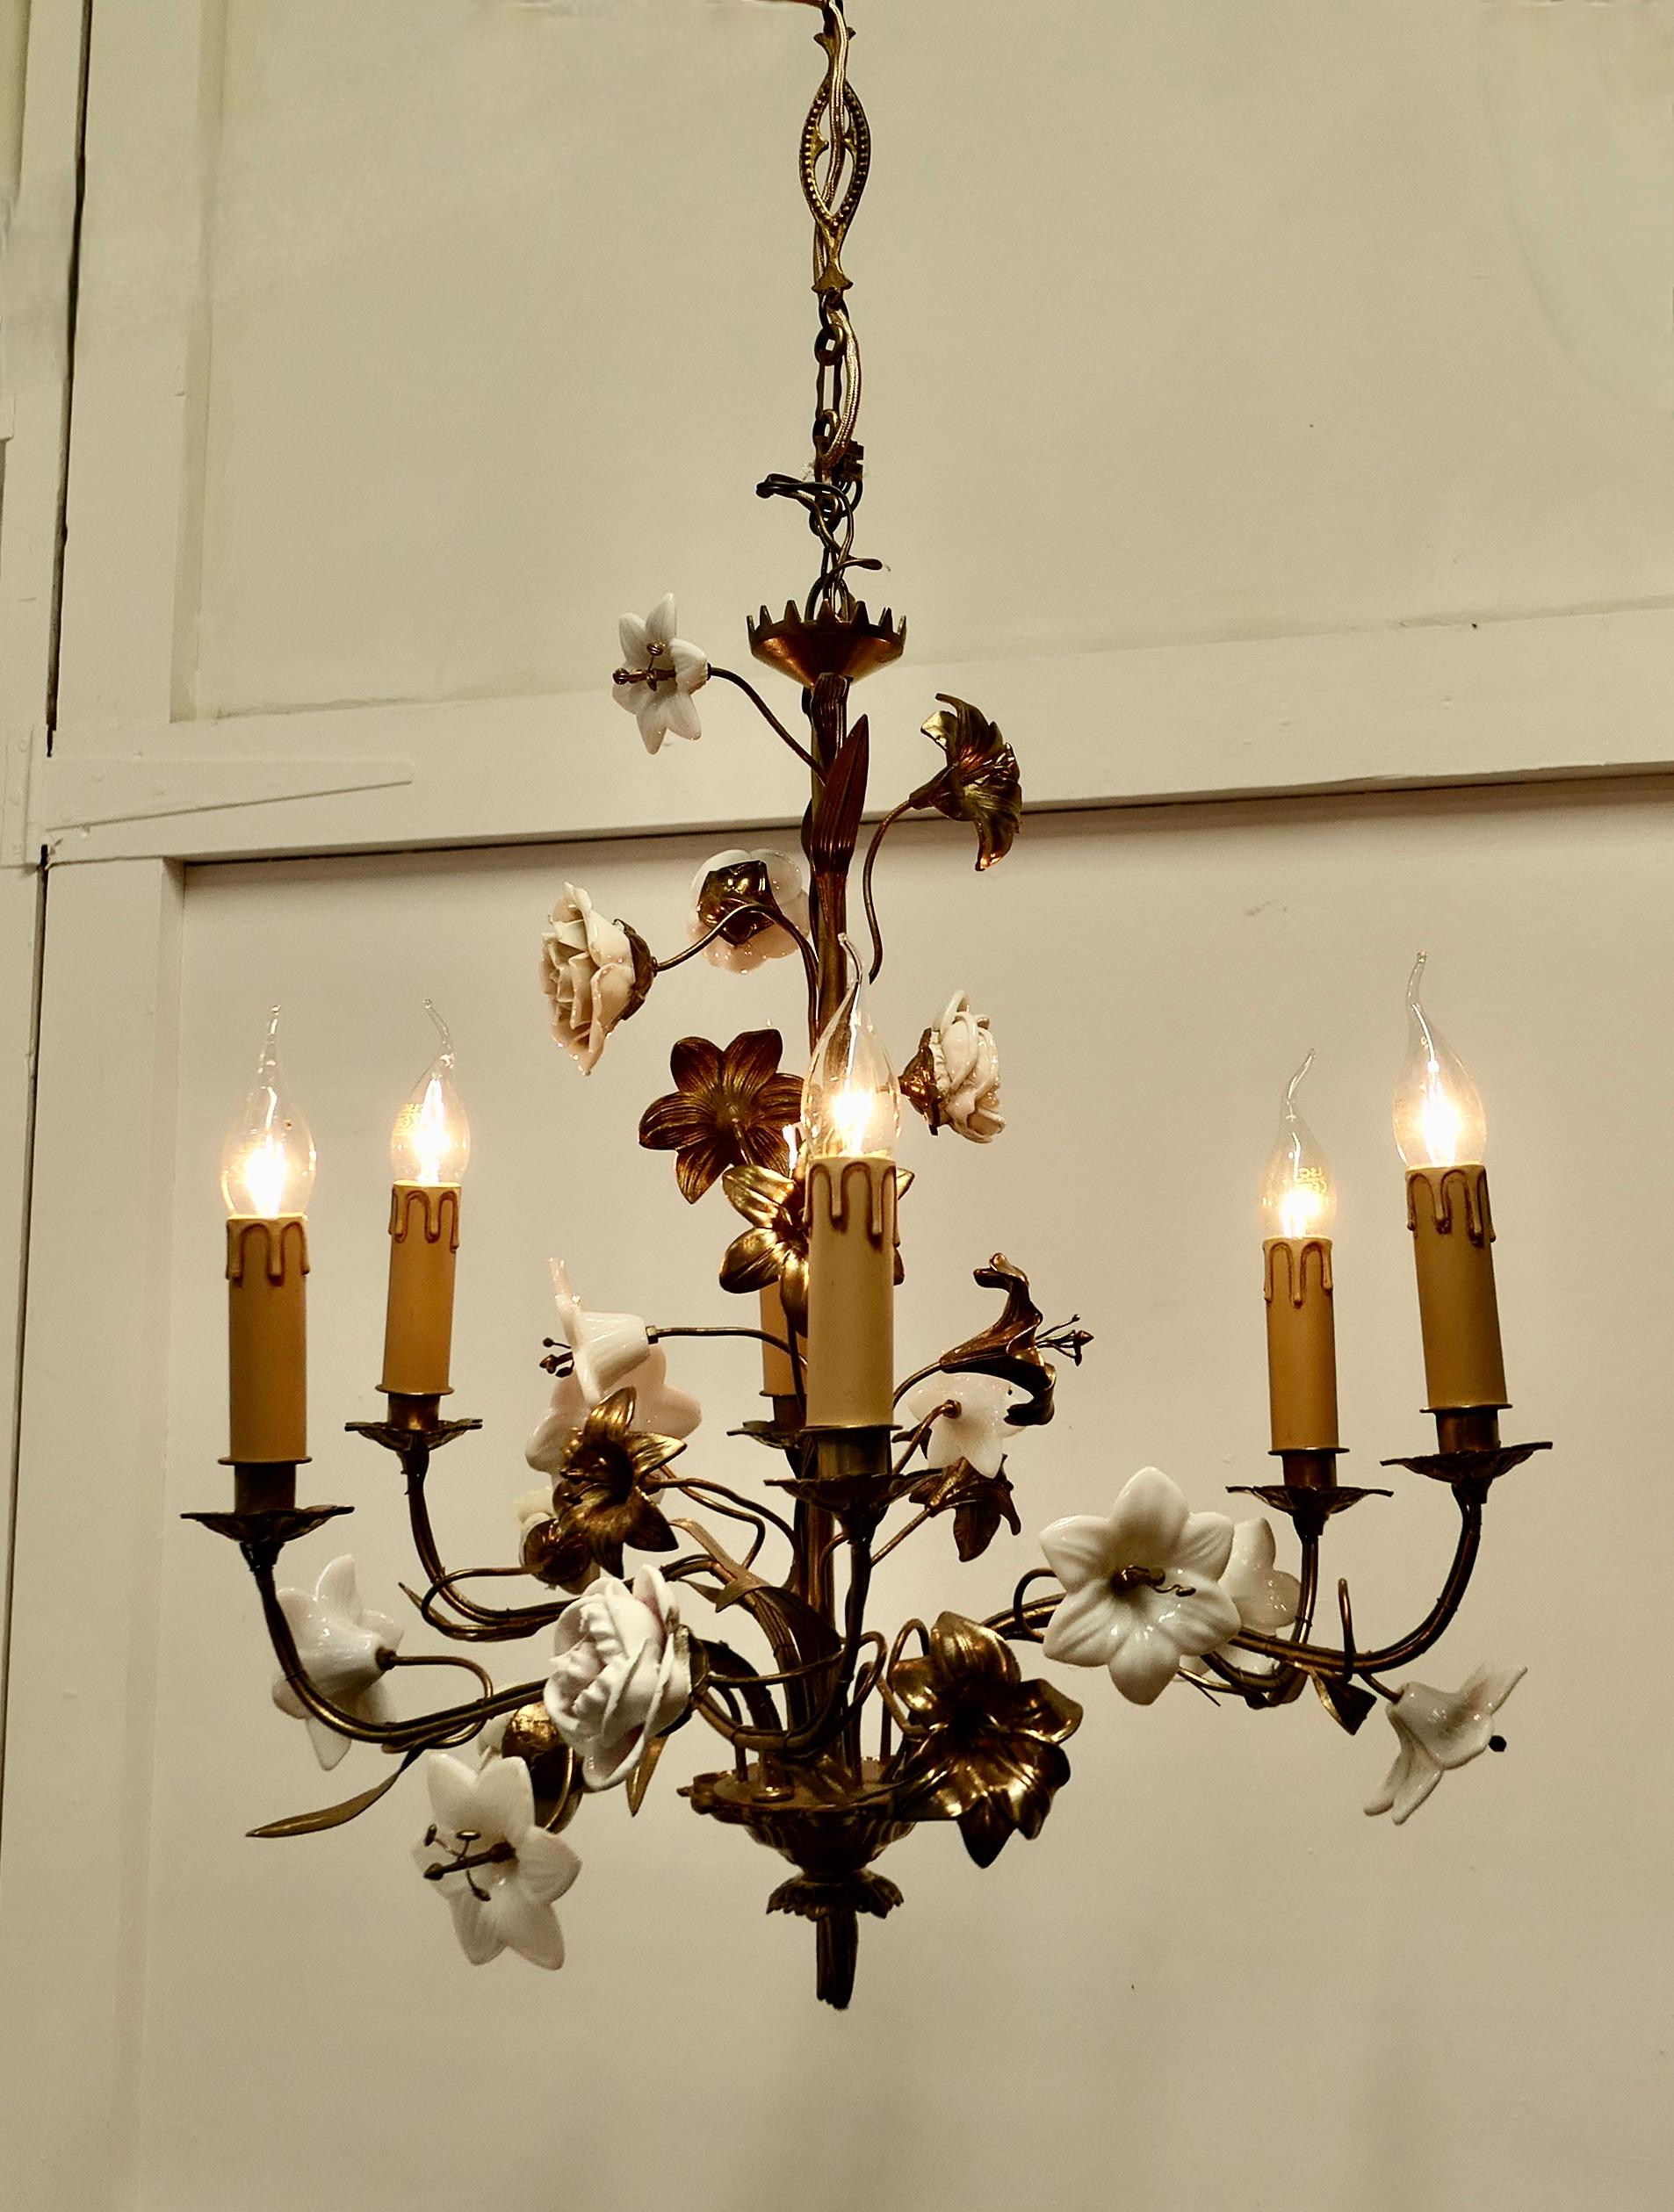 French Gilt Toleware and Floral Ceramic 6 Branch Chandelier

This is a very old and attractive dainty piece, the toleware has a gilded finish, the central column and 6 arms are hung with flowers, some of these  are the original Gilt and Porcelain